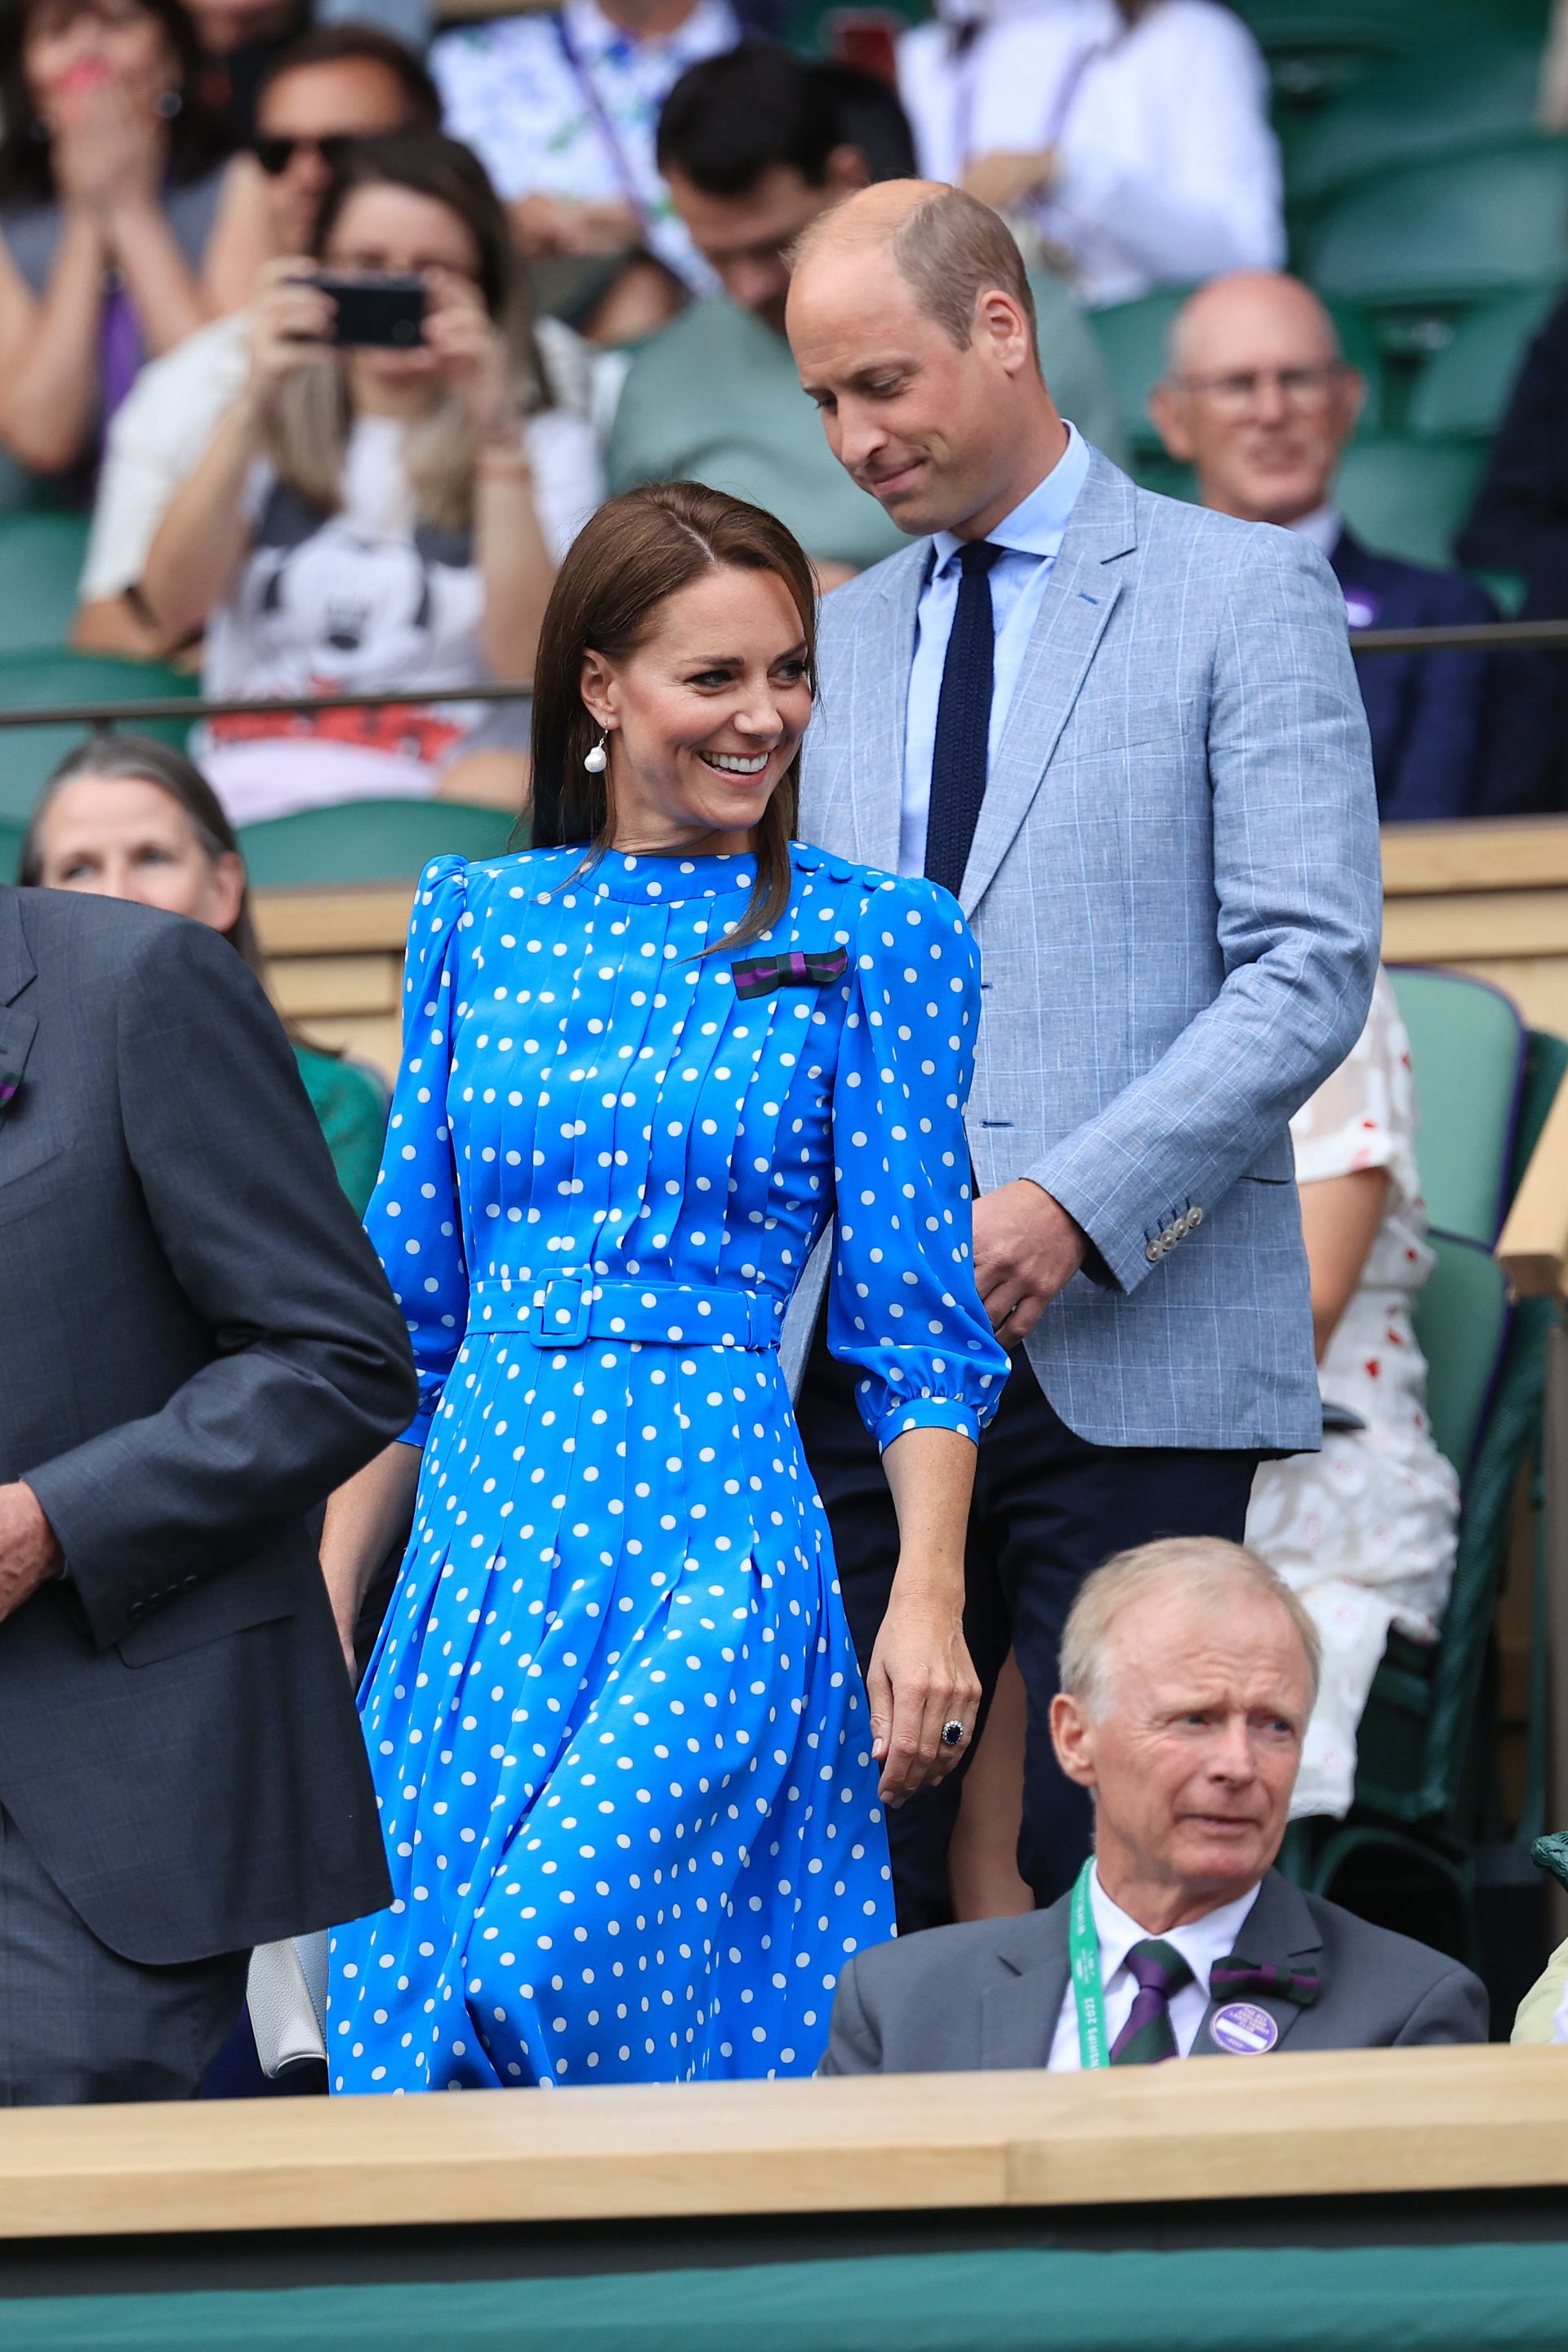 Kate Middleton's blue and white polka dot dress is one of her favorites ...